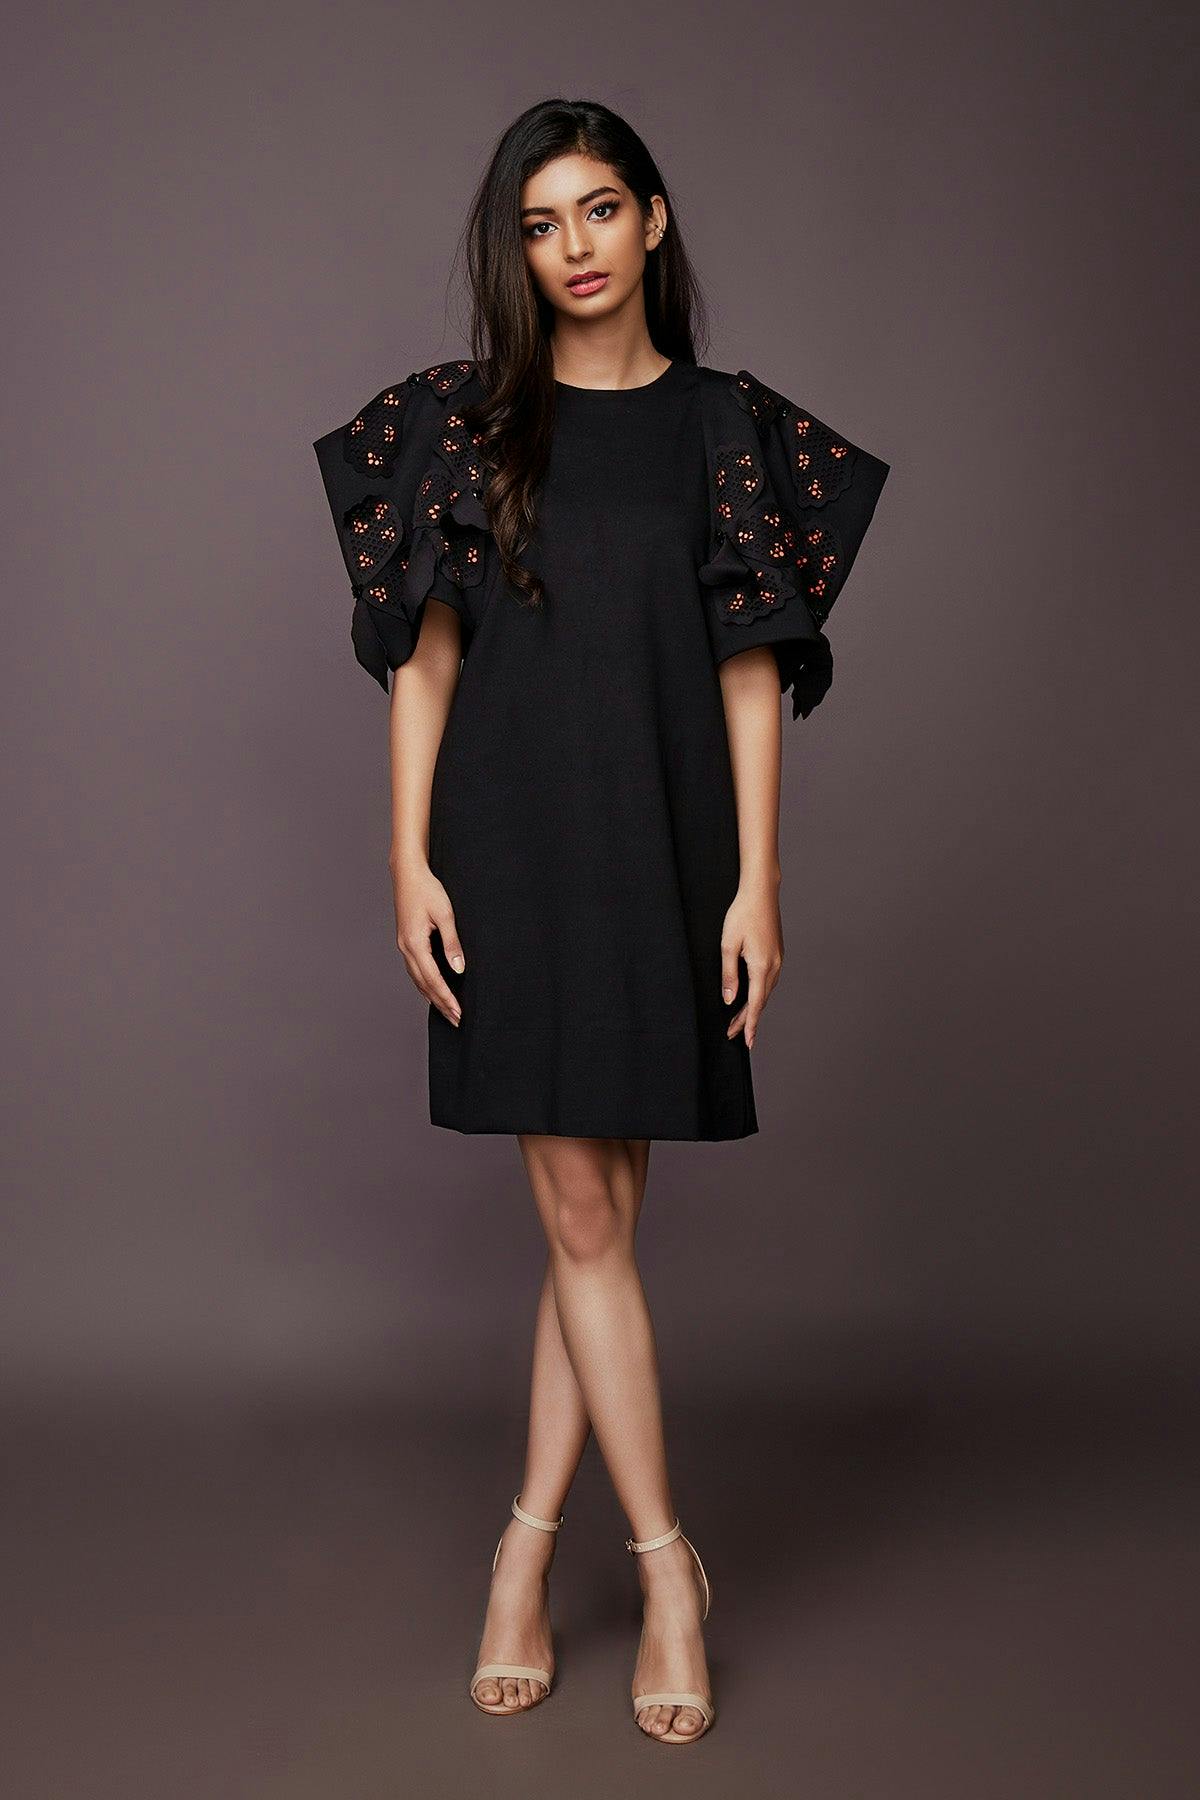 NN-1102 ::: Black Shift Dress With Neon Cutwork Sleeves, a product by Deepika Arora